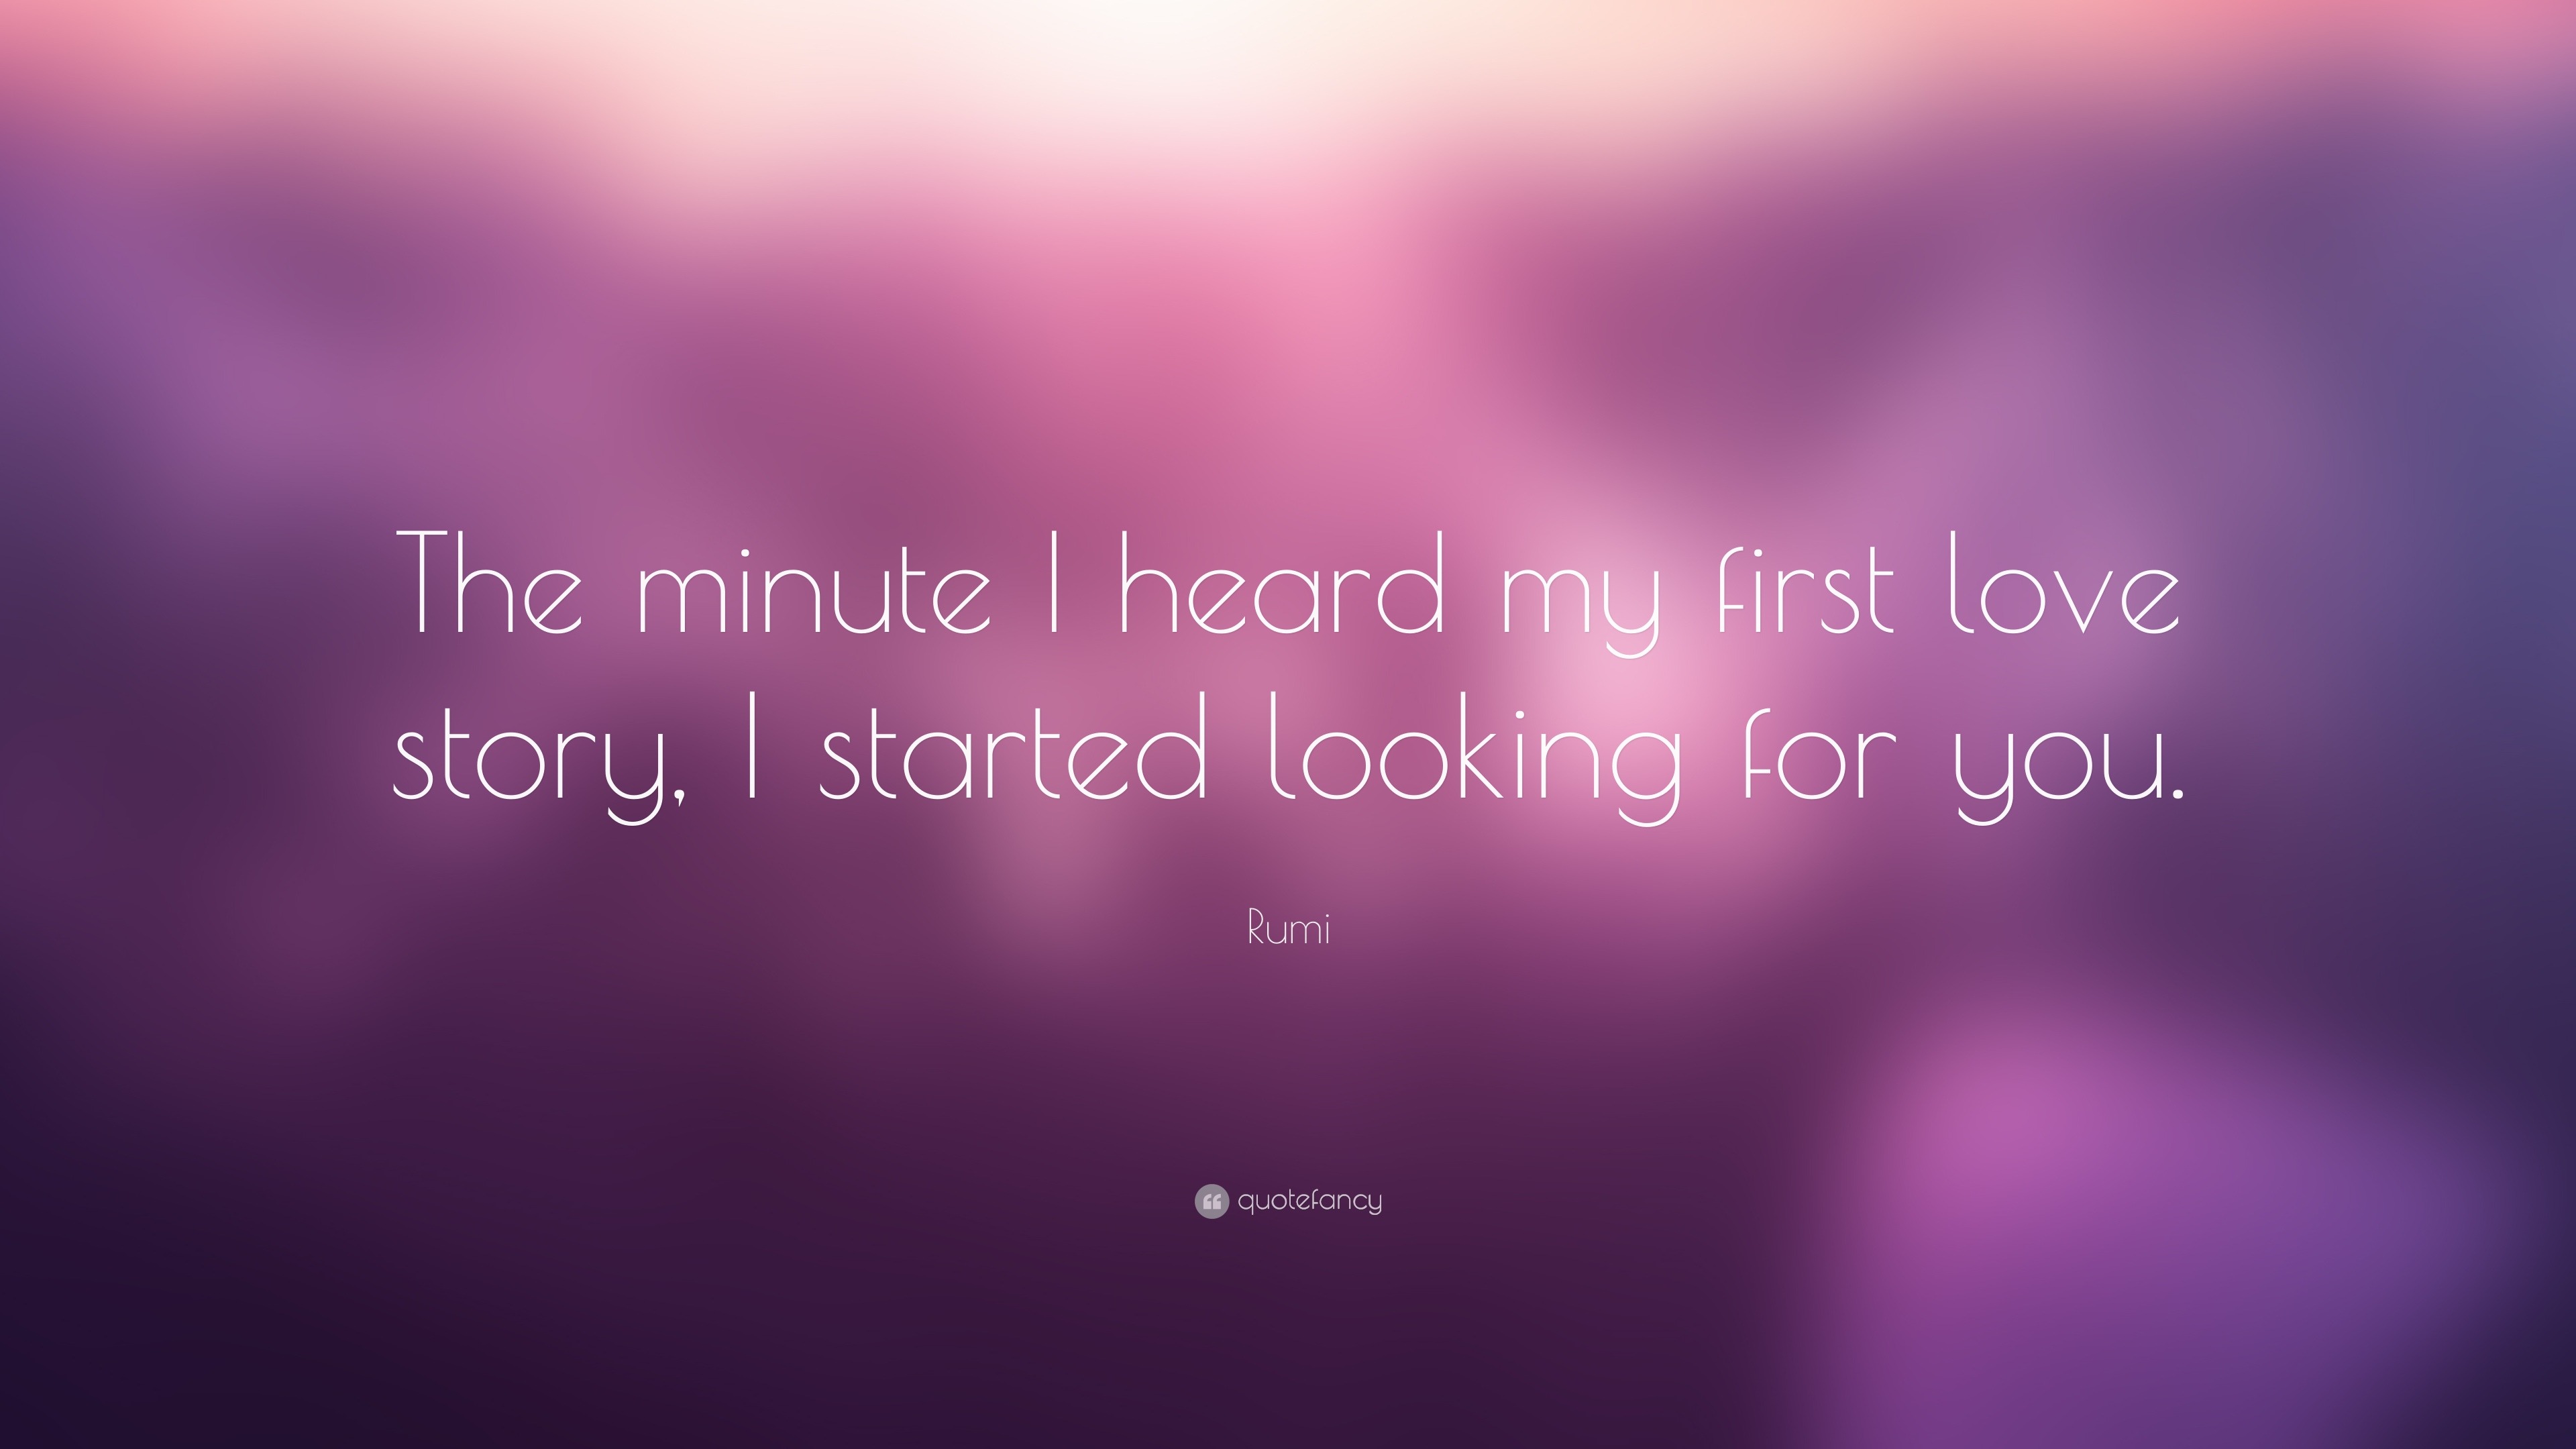 Rumi Quote “The minute I heard my first love story I started looking